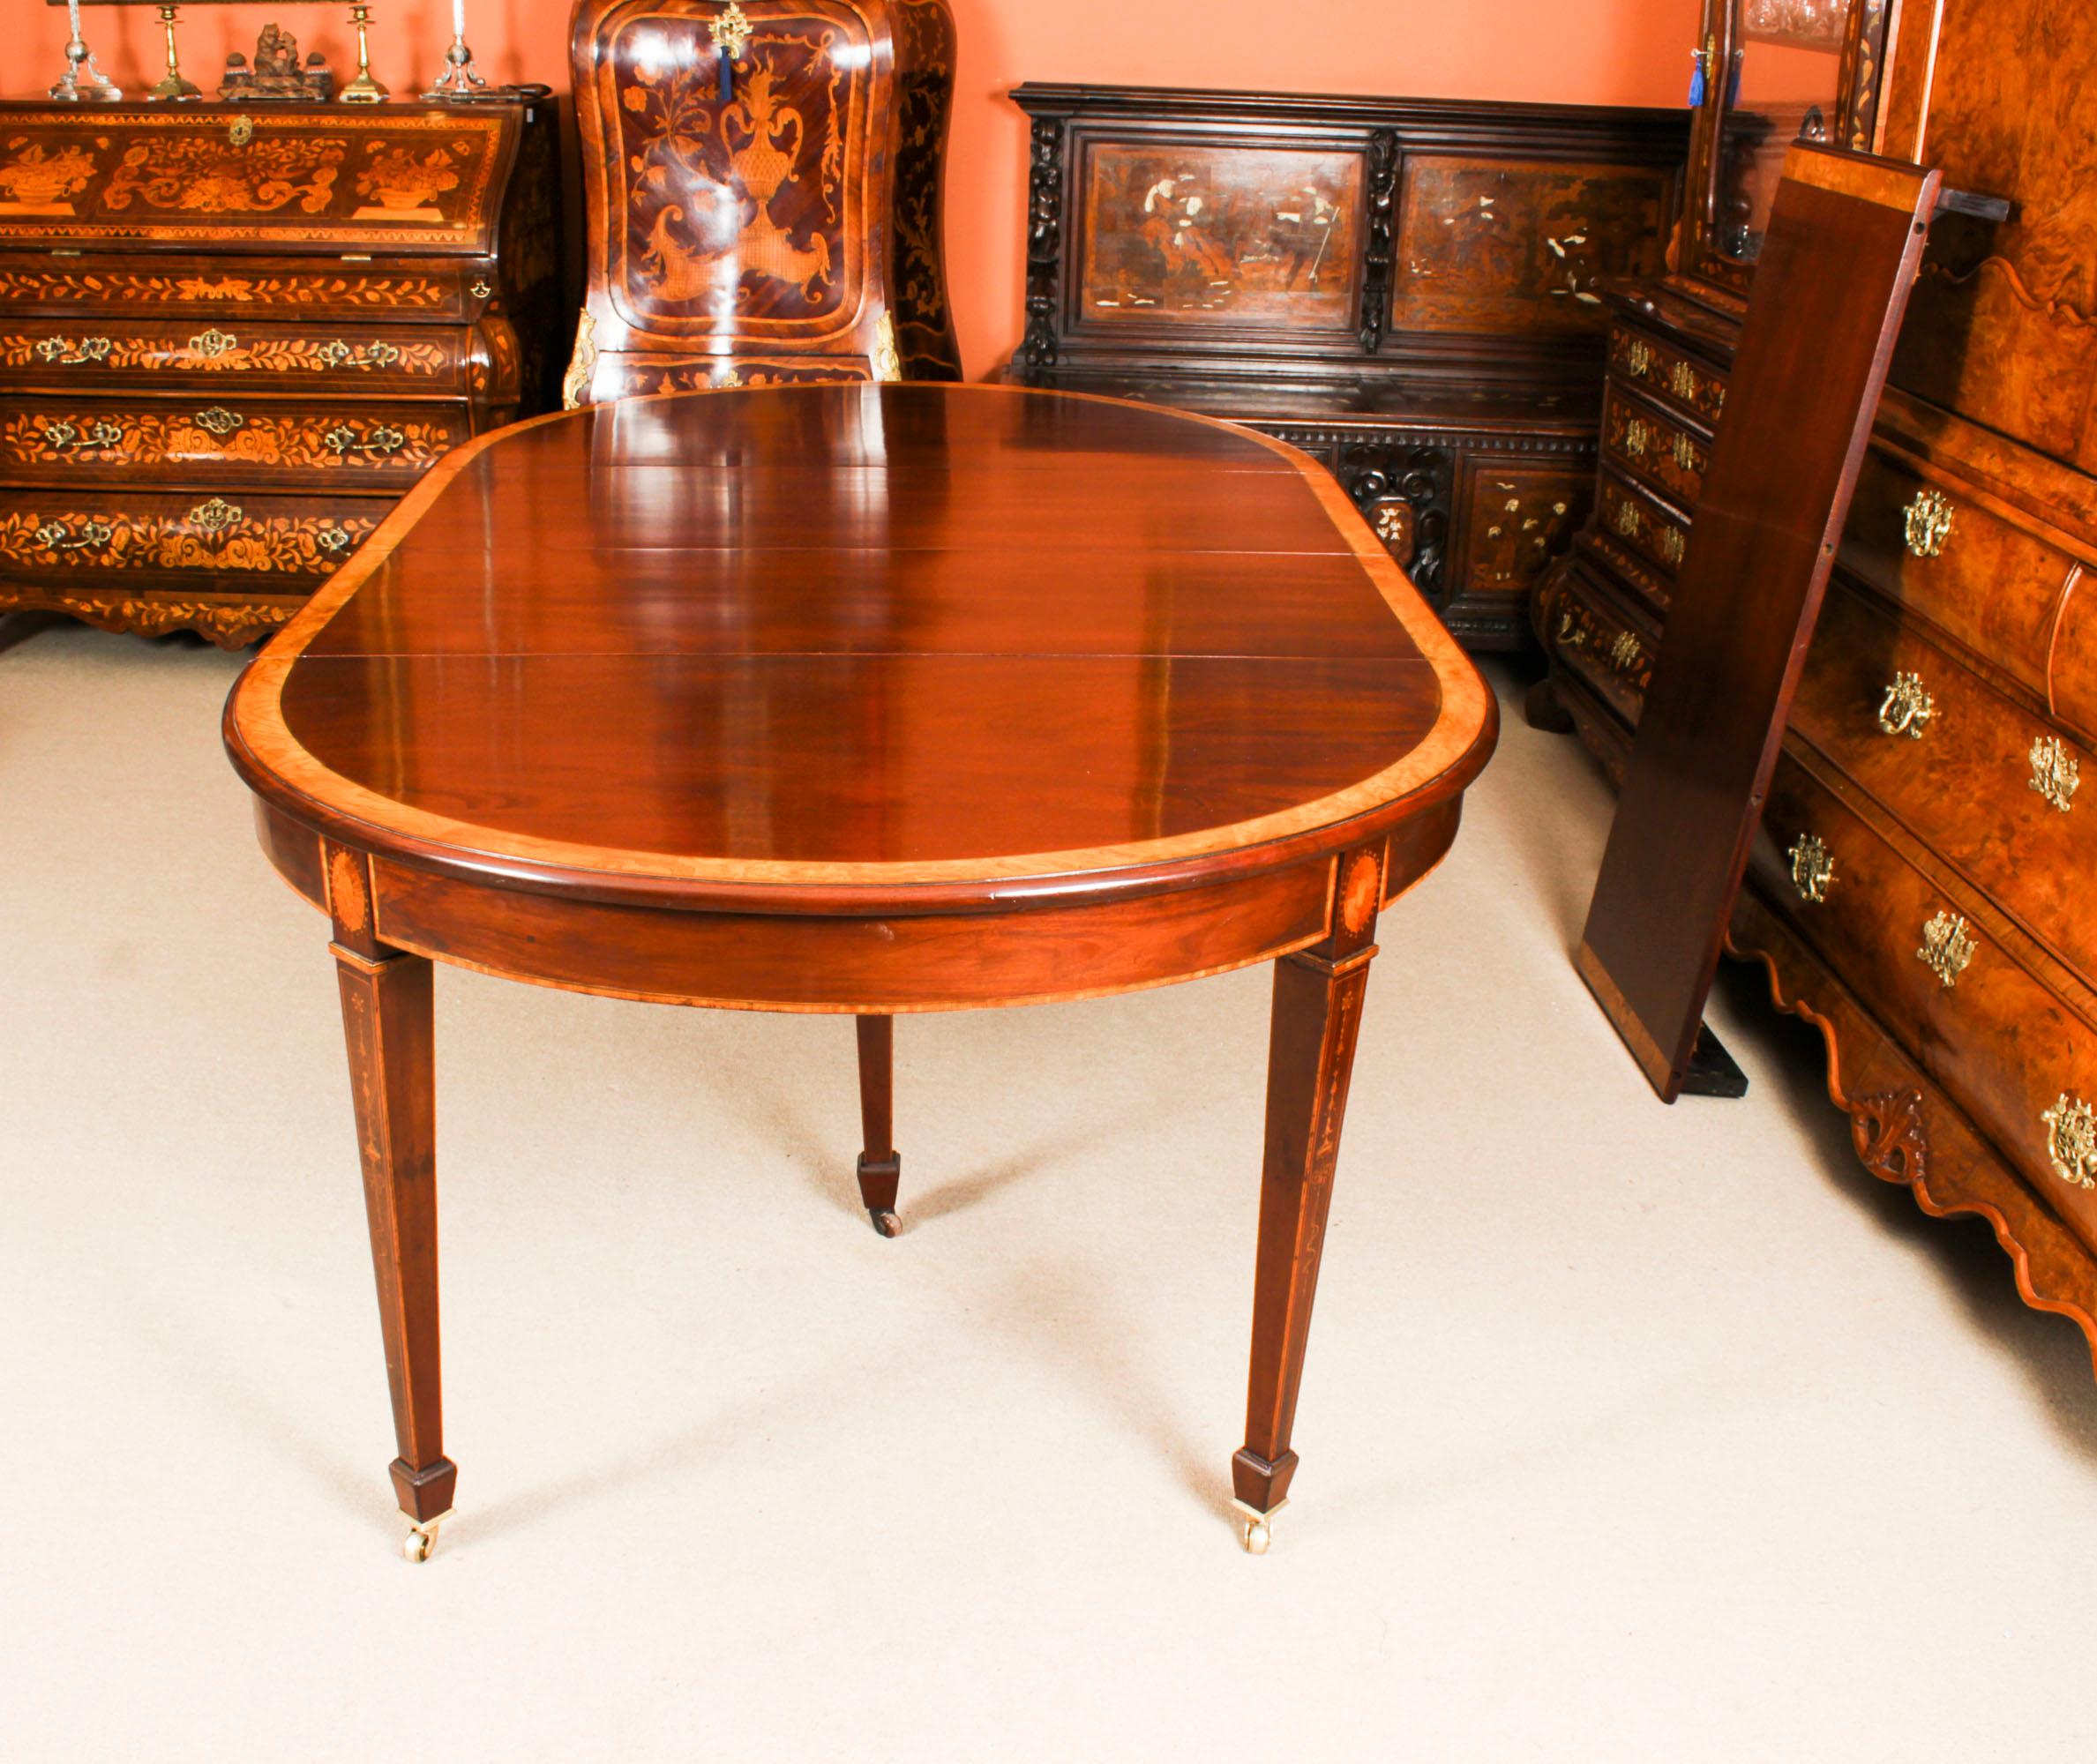 Antique Edwardian Inlaid Flame Mahogany Extending Dining Table Early 20th C. 1